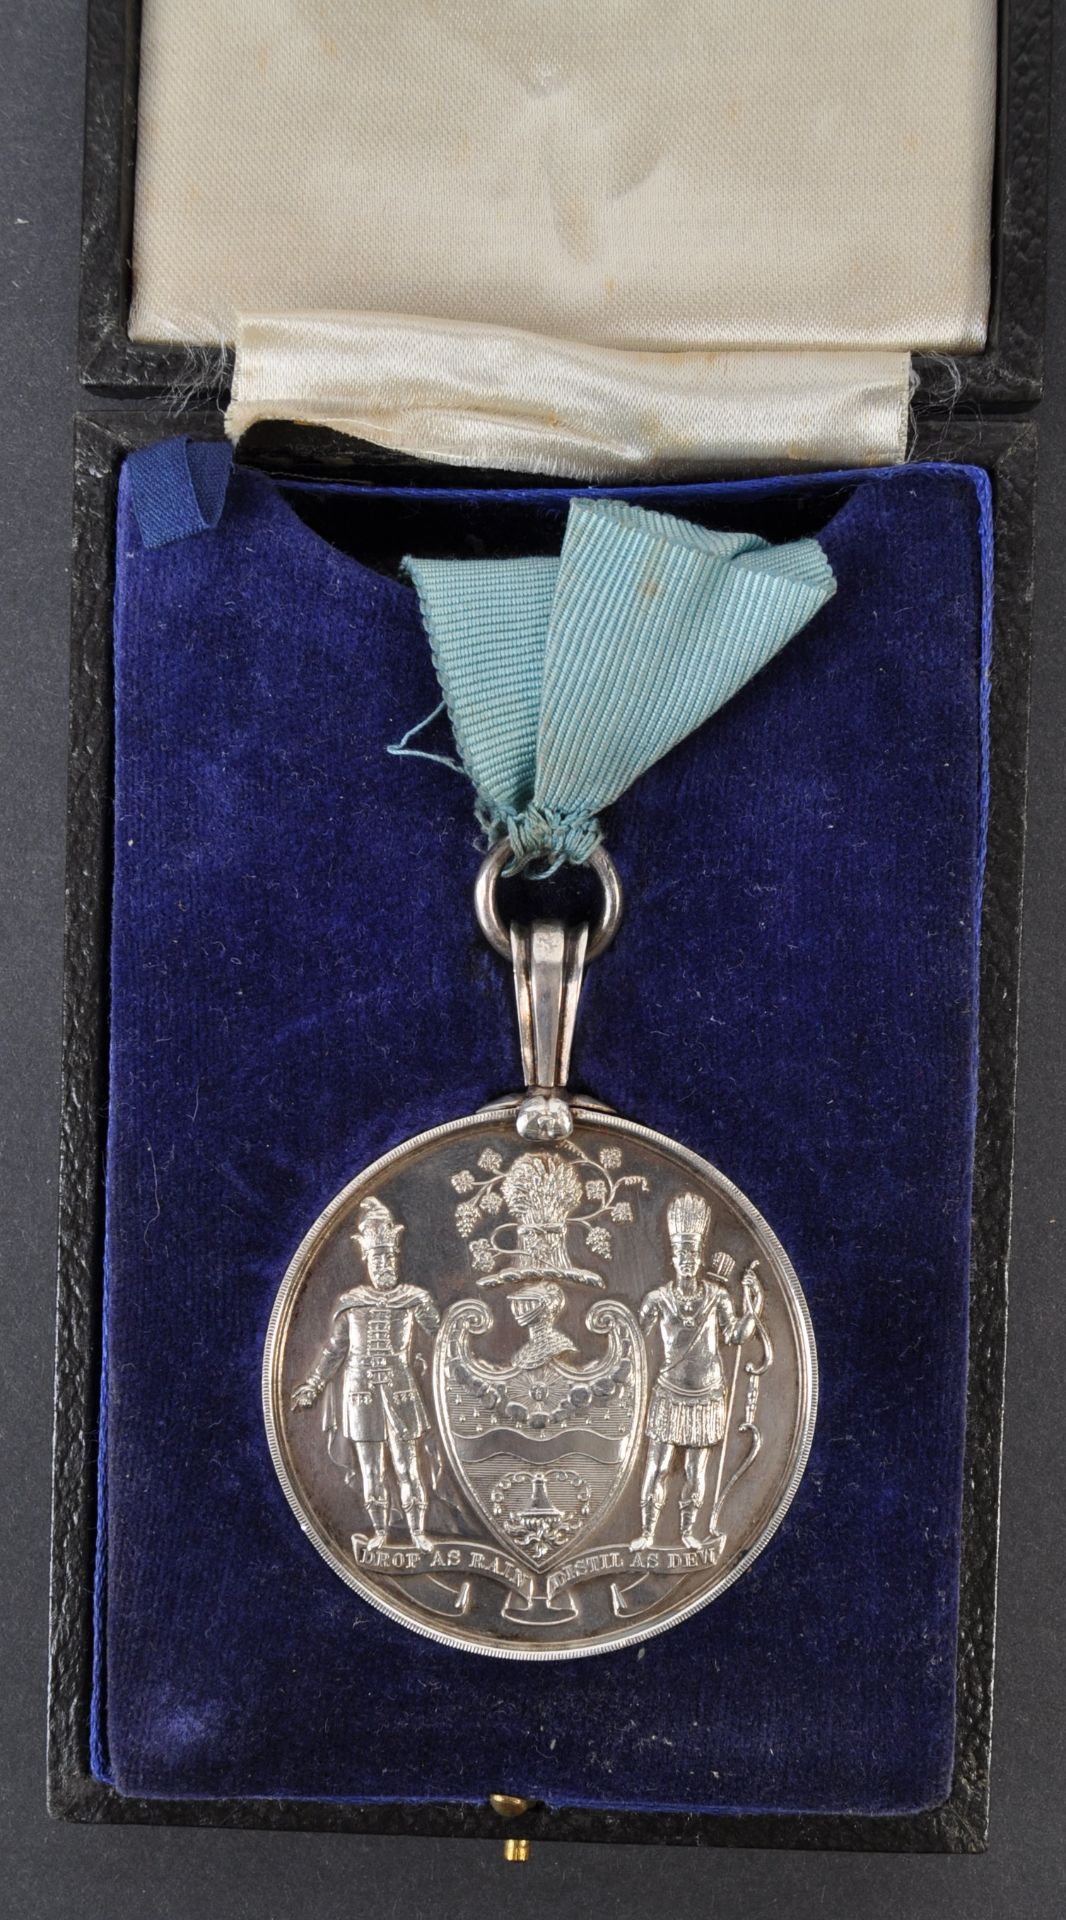 COLLECTION OF ANTIQUE MEDALLIONS - 1945 WORSHIPFUL COMPANY OF DISTILLERS - Image 4 of 4